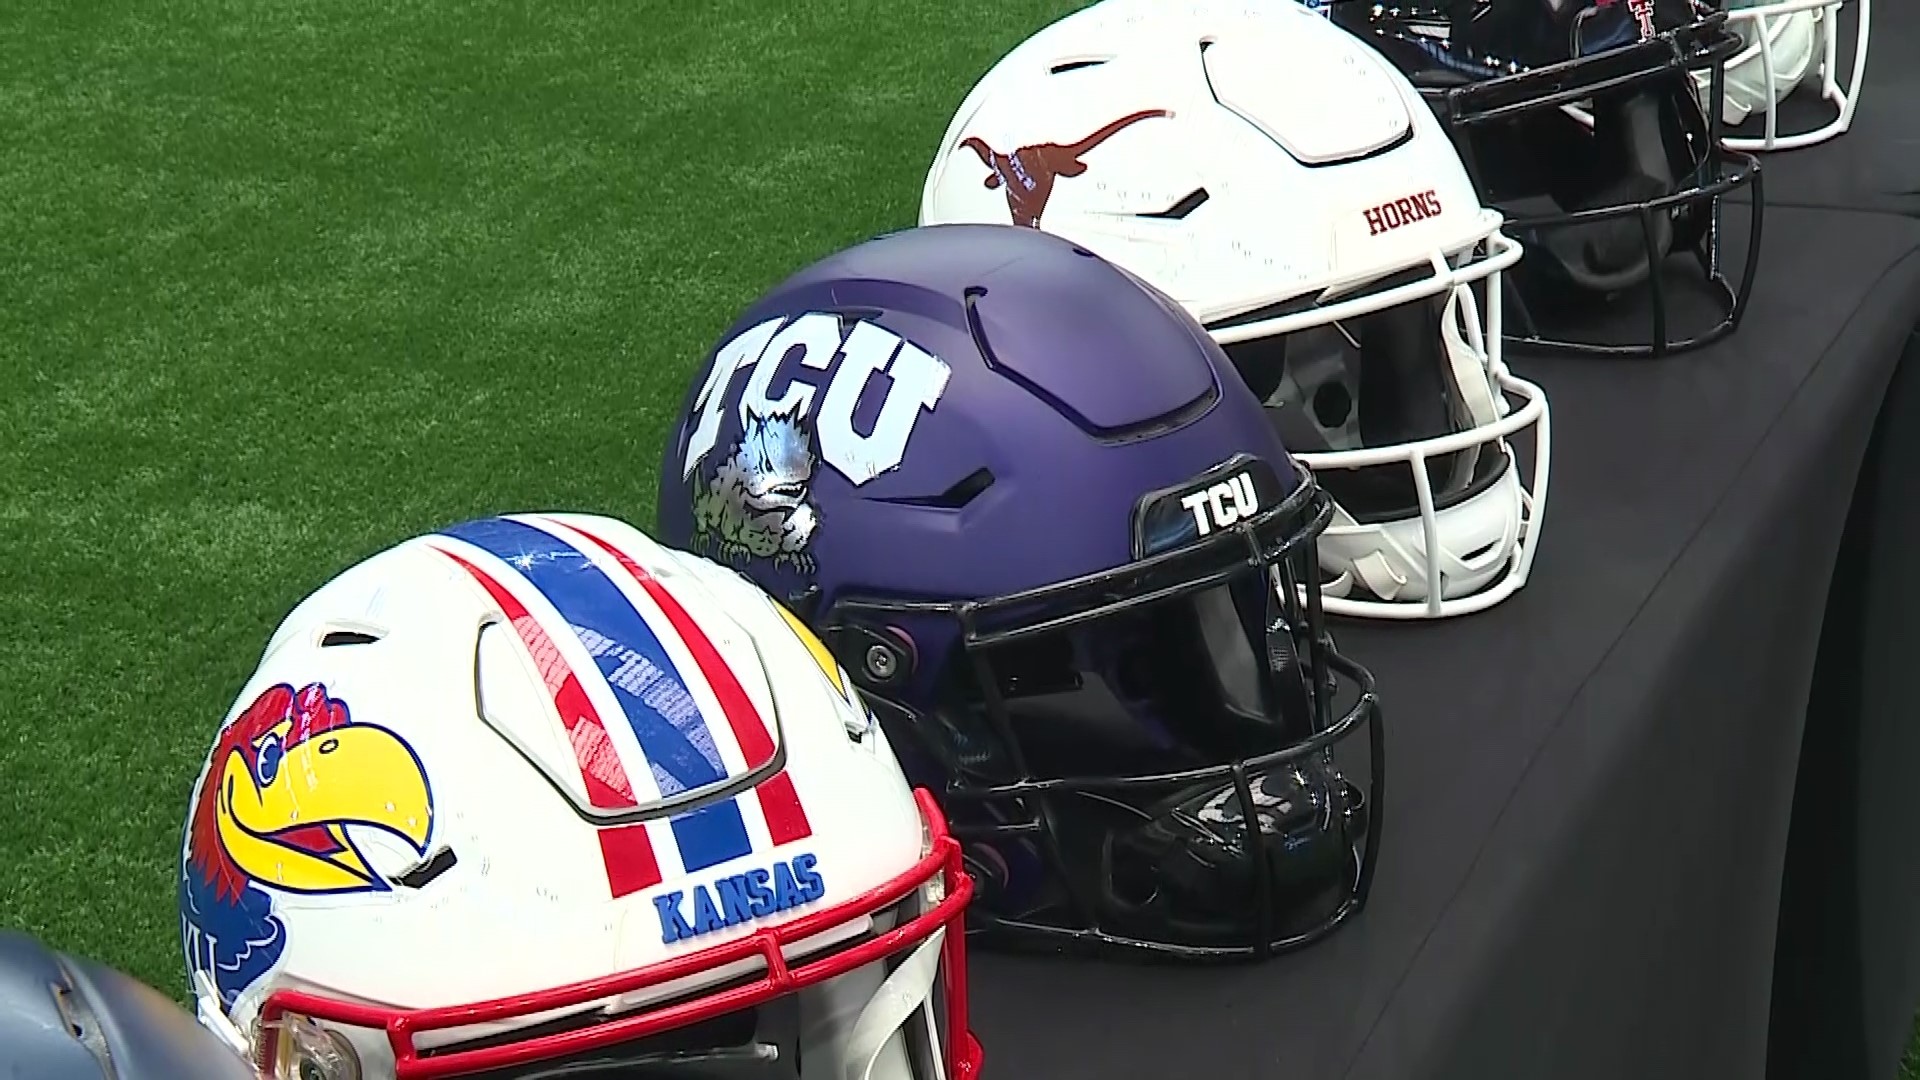 One of the big questions for the upcoming college football season in North Texas: Can TCU football mimic last year’s success?